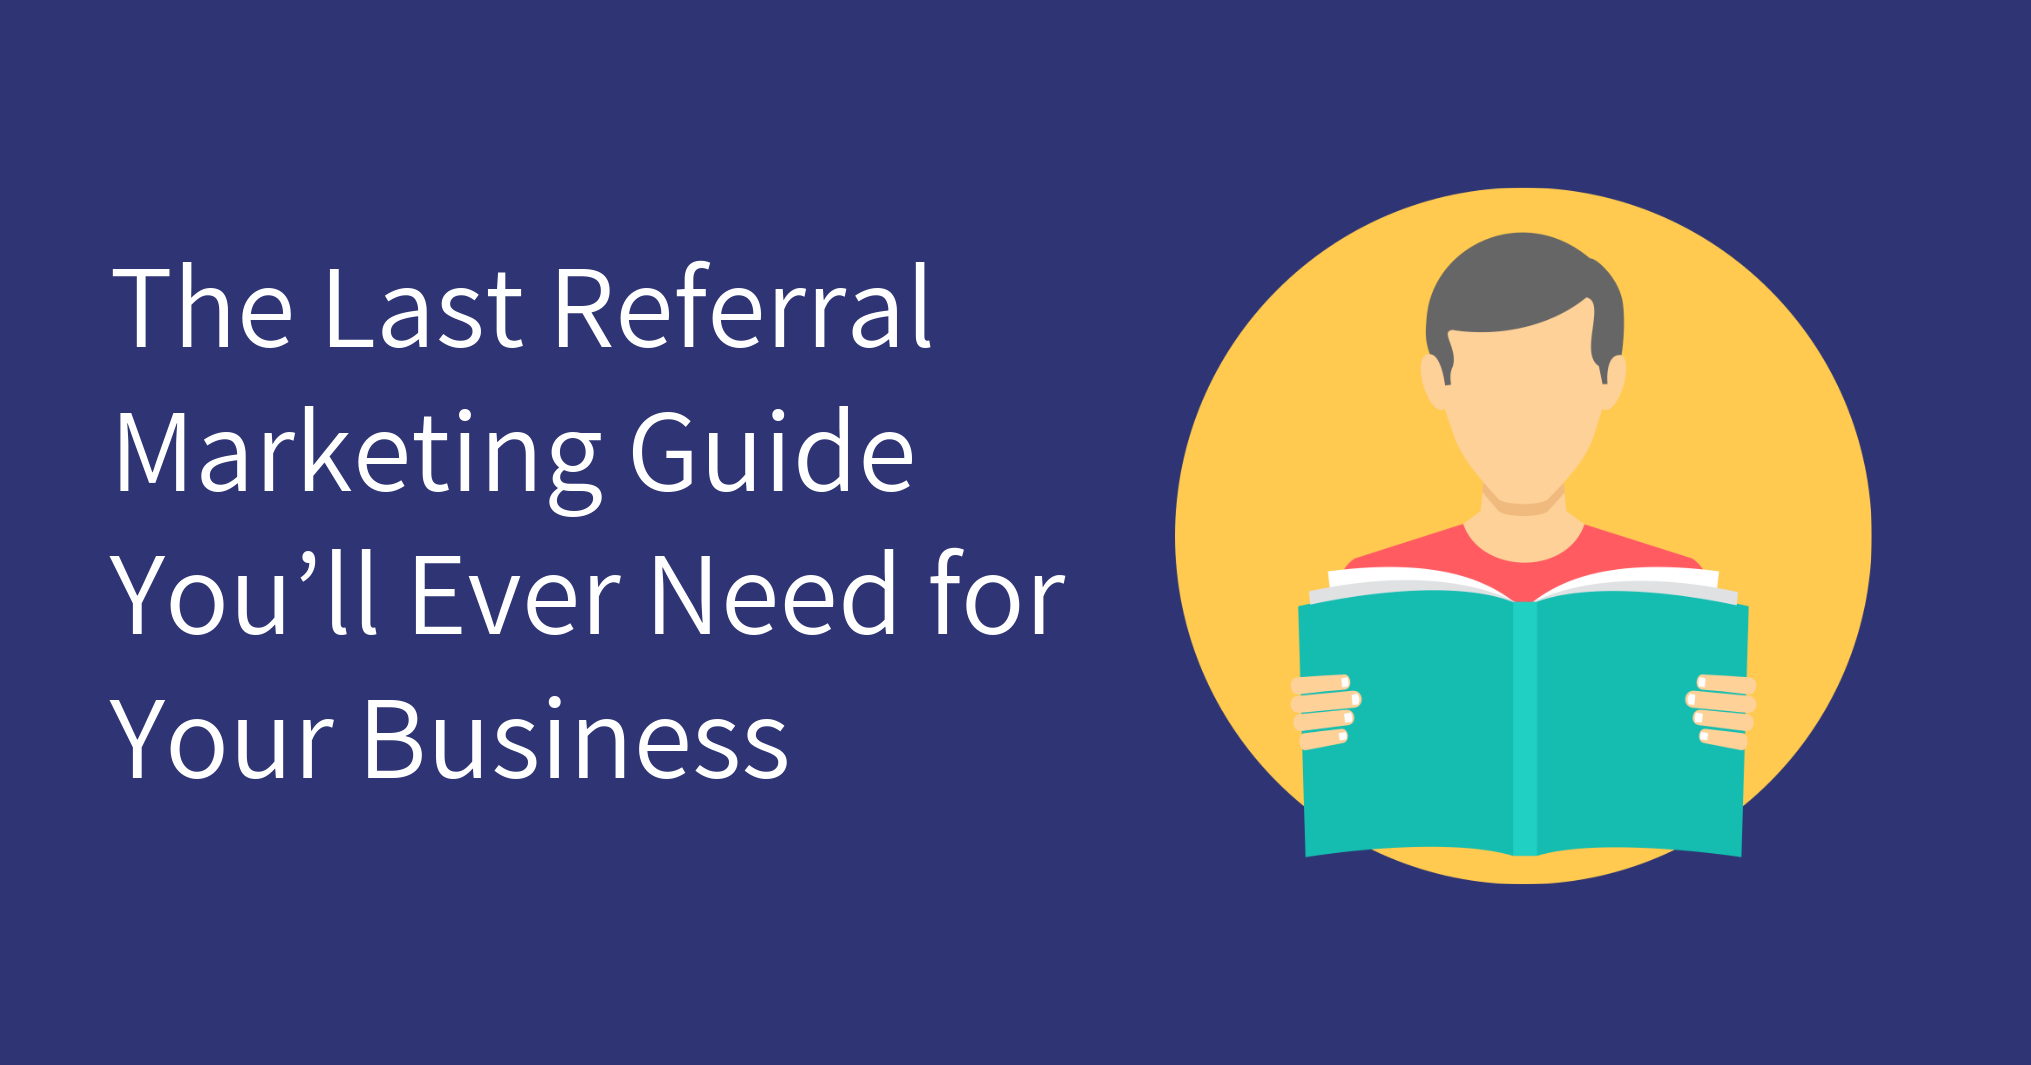 The Last Referral Marketing Guide You’ll Ever Need for Your Business